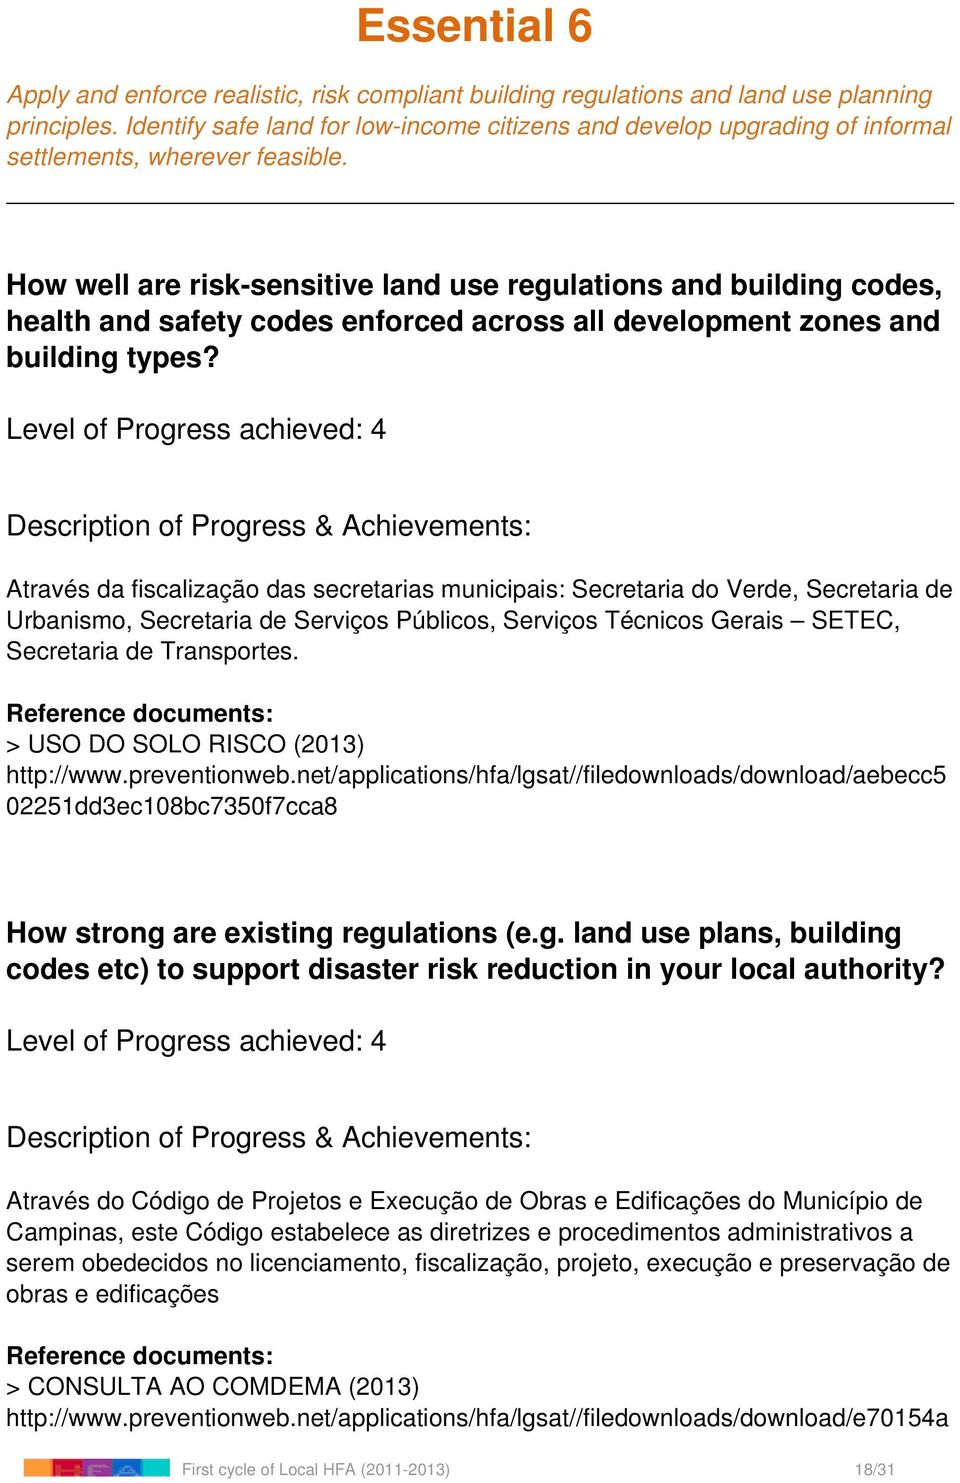 How well are risk-sensitive land use regulations and building codes, health and safety codes enforced across all development zones and building types?